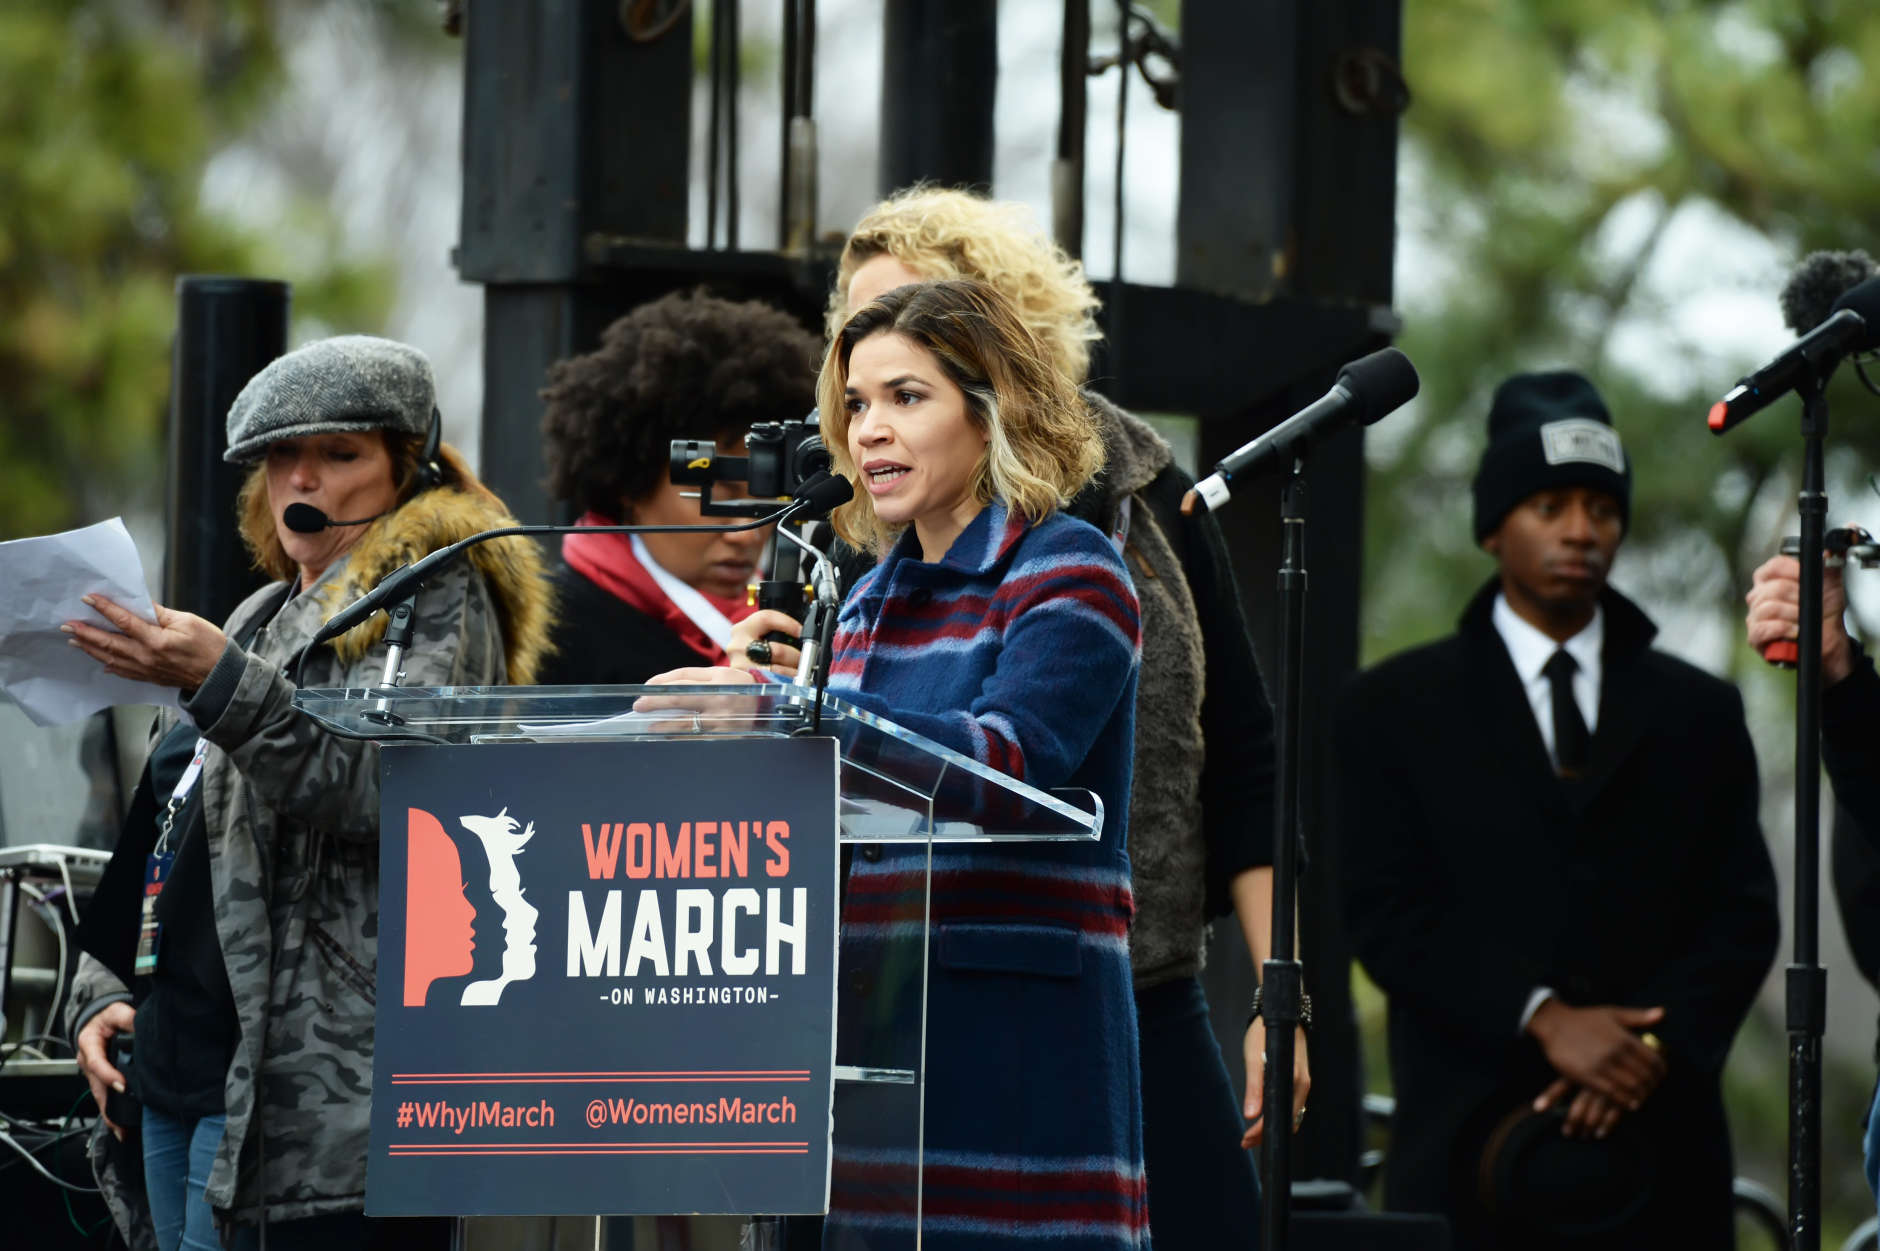 Actress America Ferrera speaks on stage during the Women's March on Washington on Saturday, Jan. 21, 2017. (Courtesy Shannon Finney)